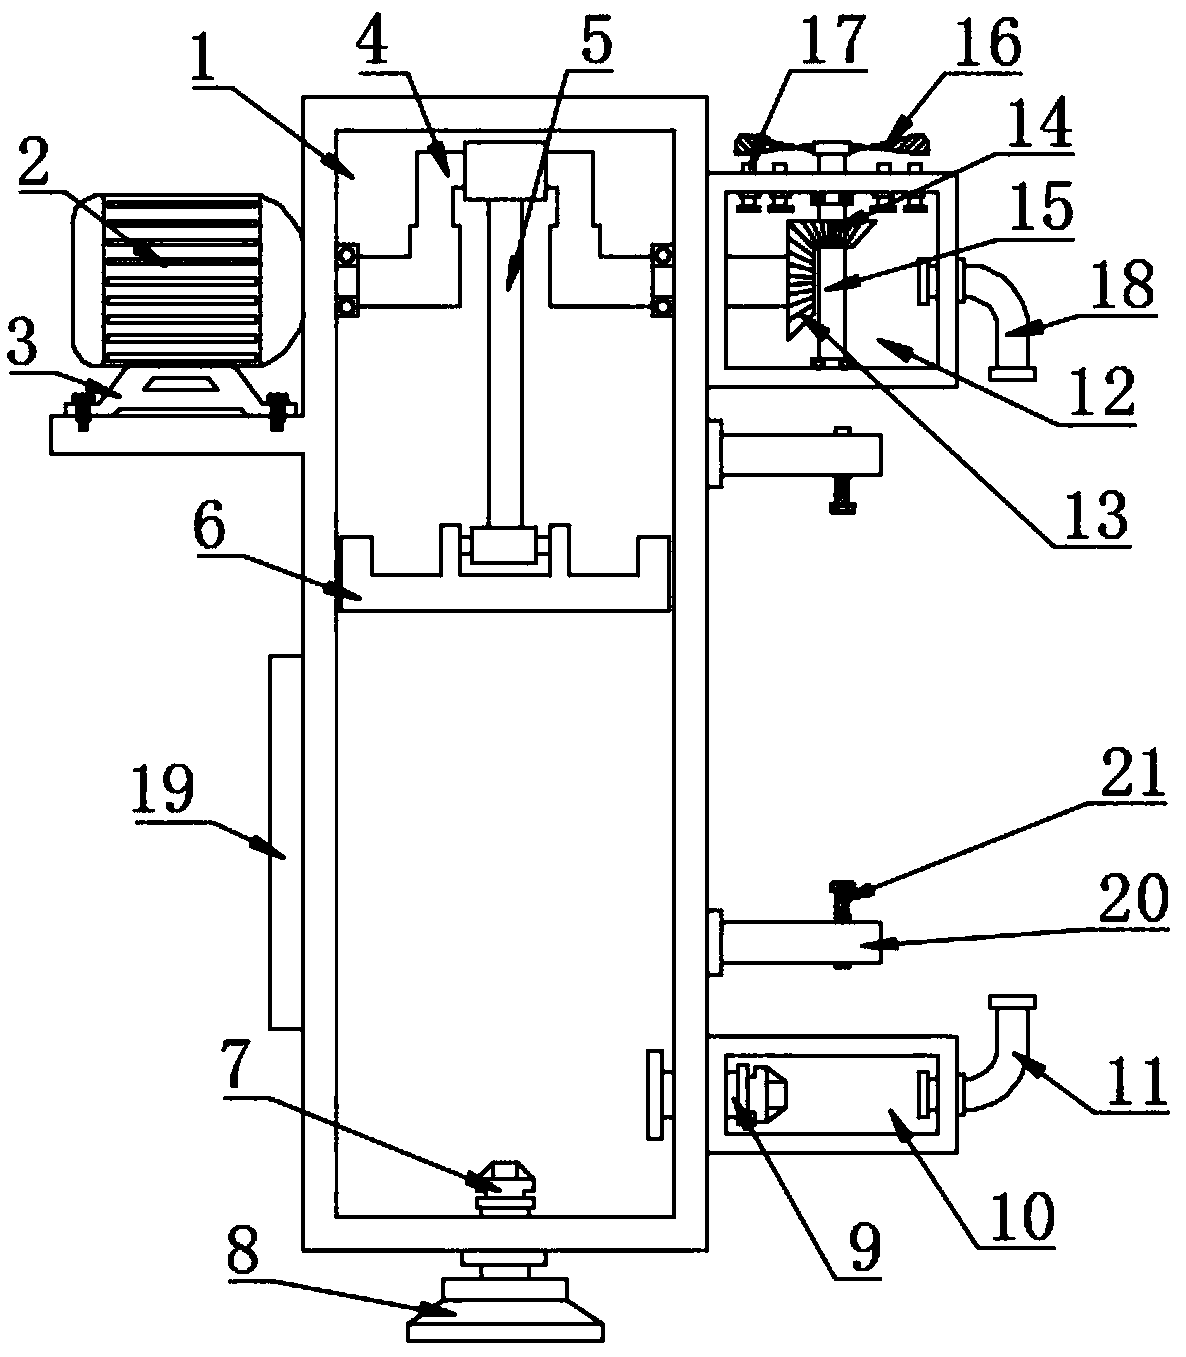 Cooling protection device for electromechanical equipment